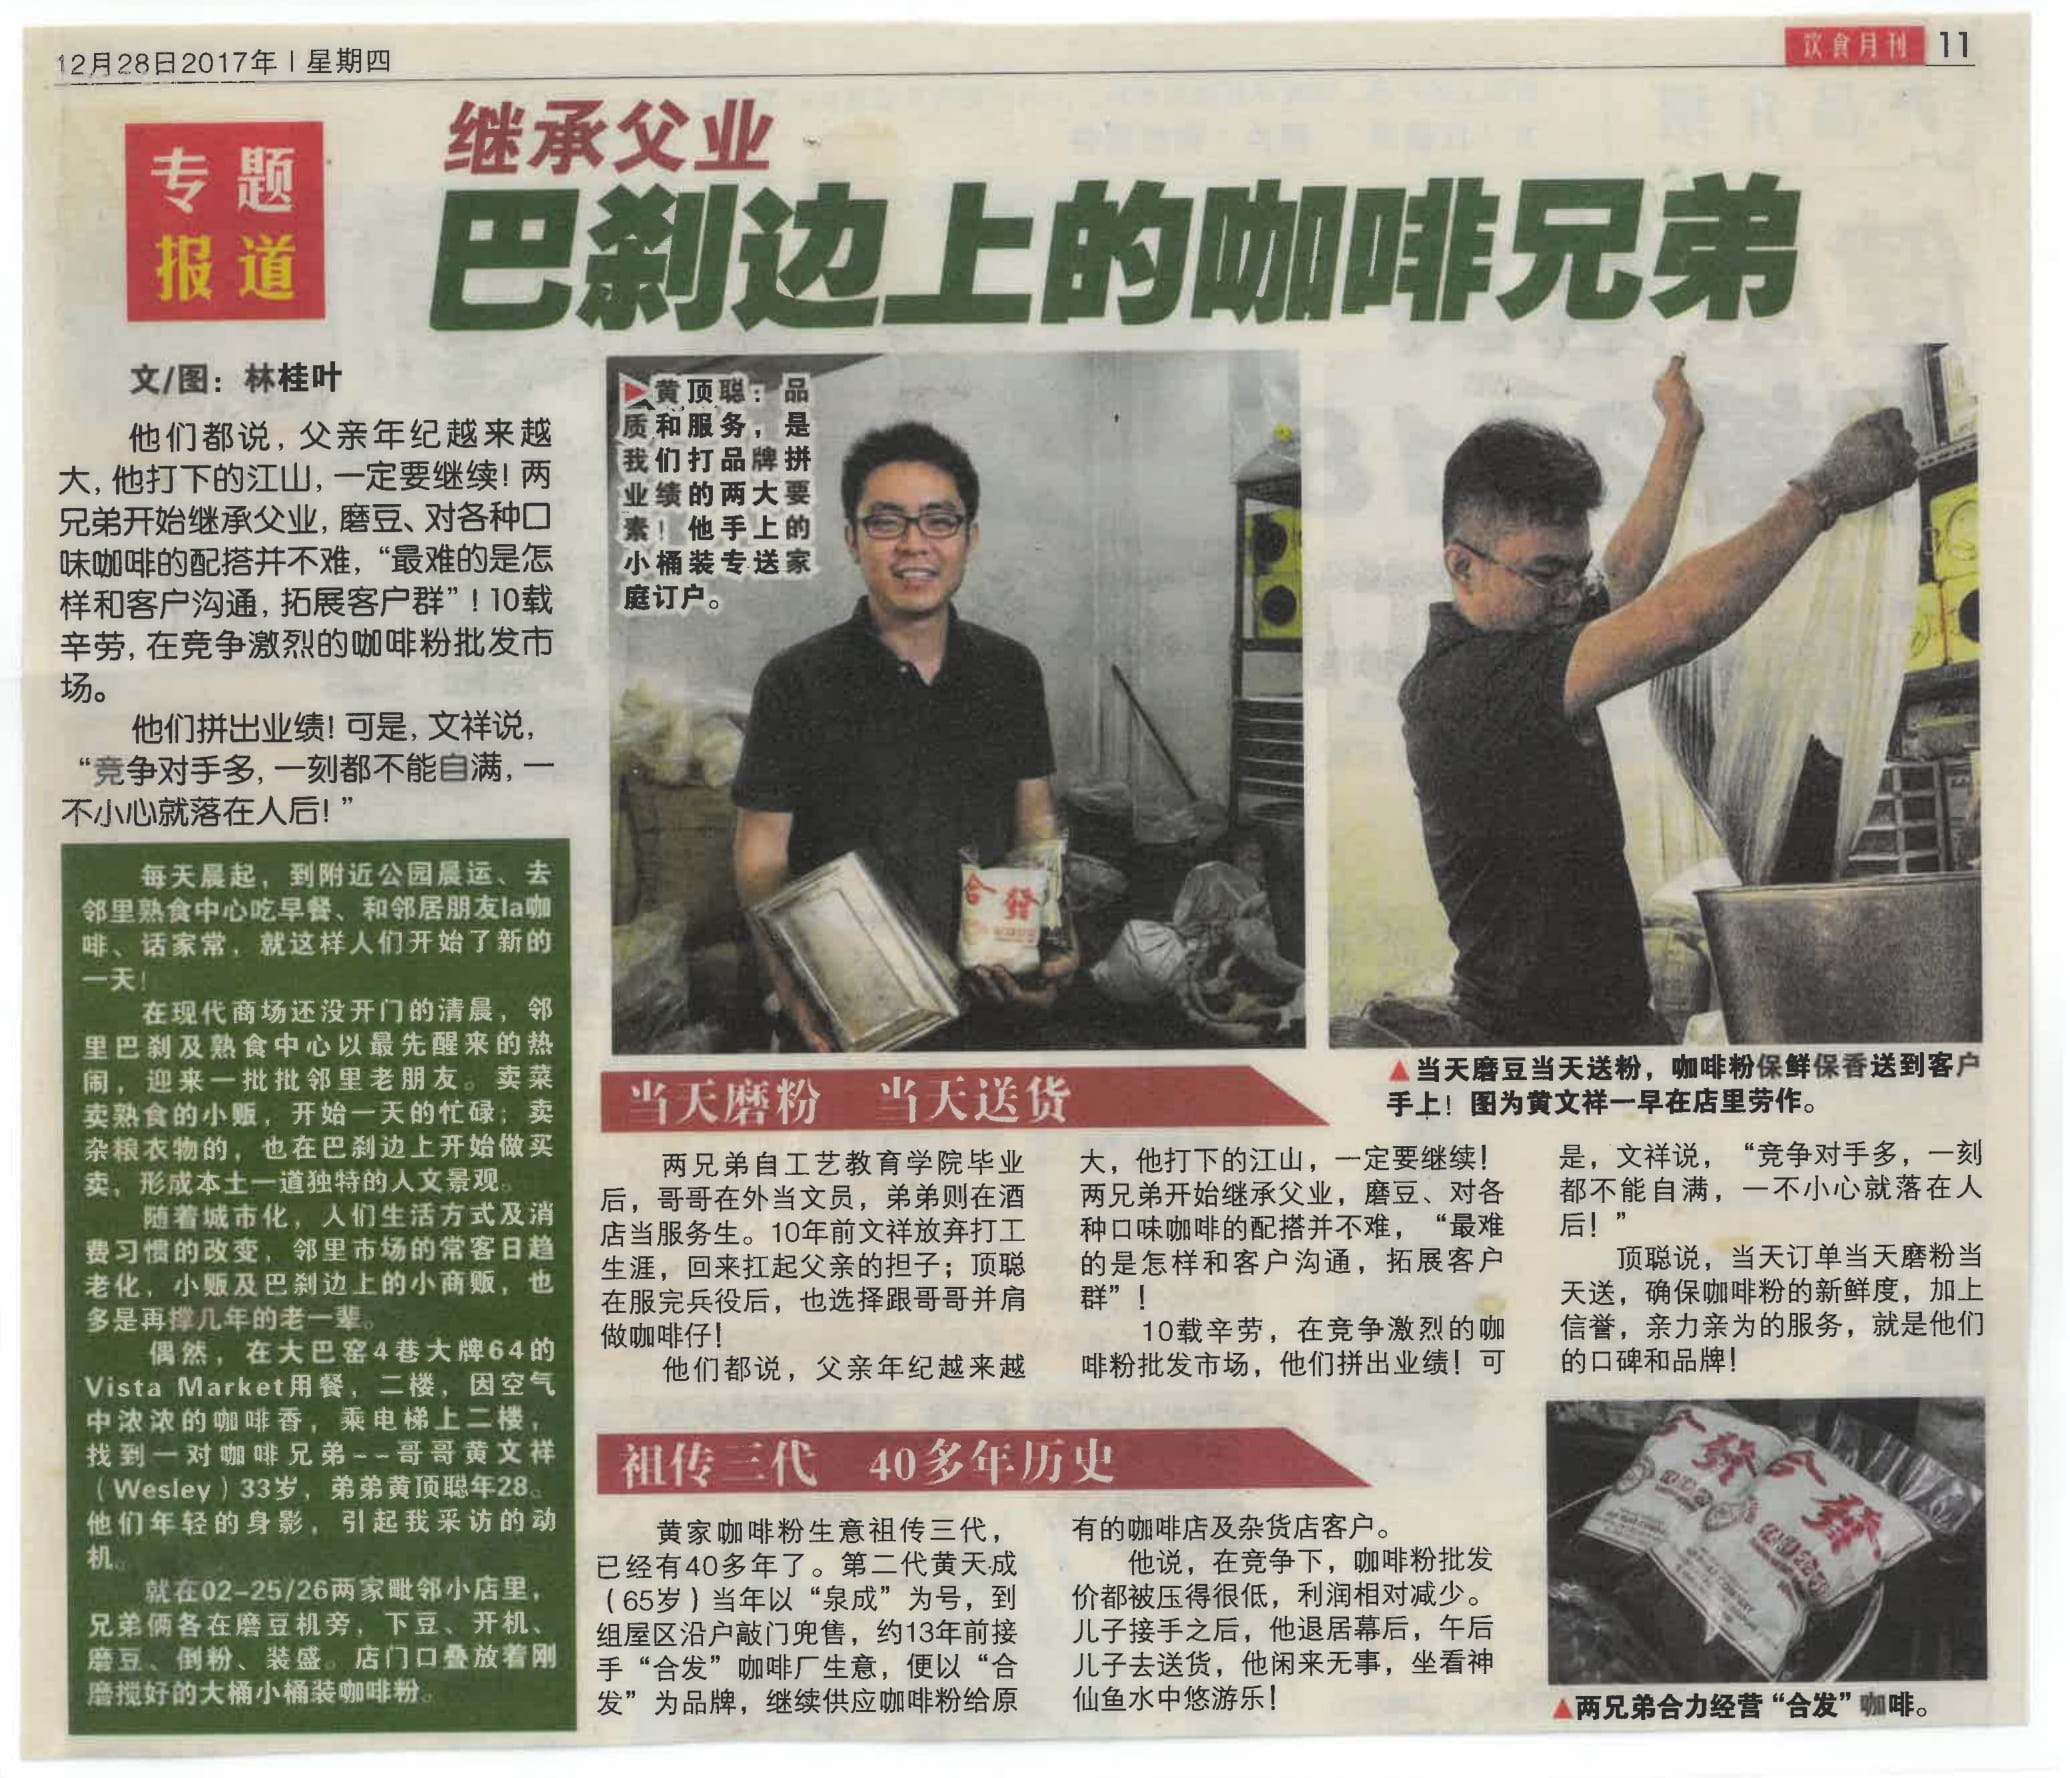 gold beverage news article